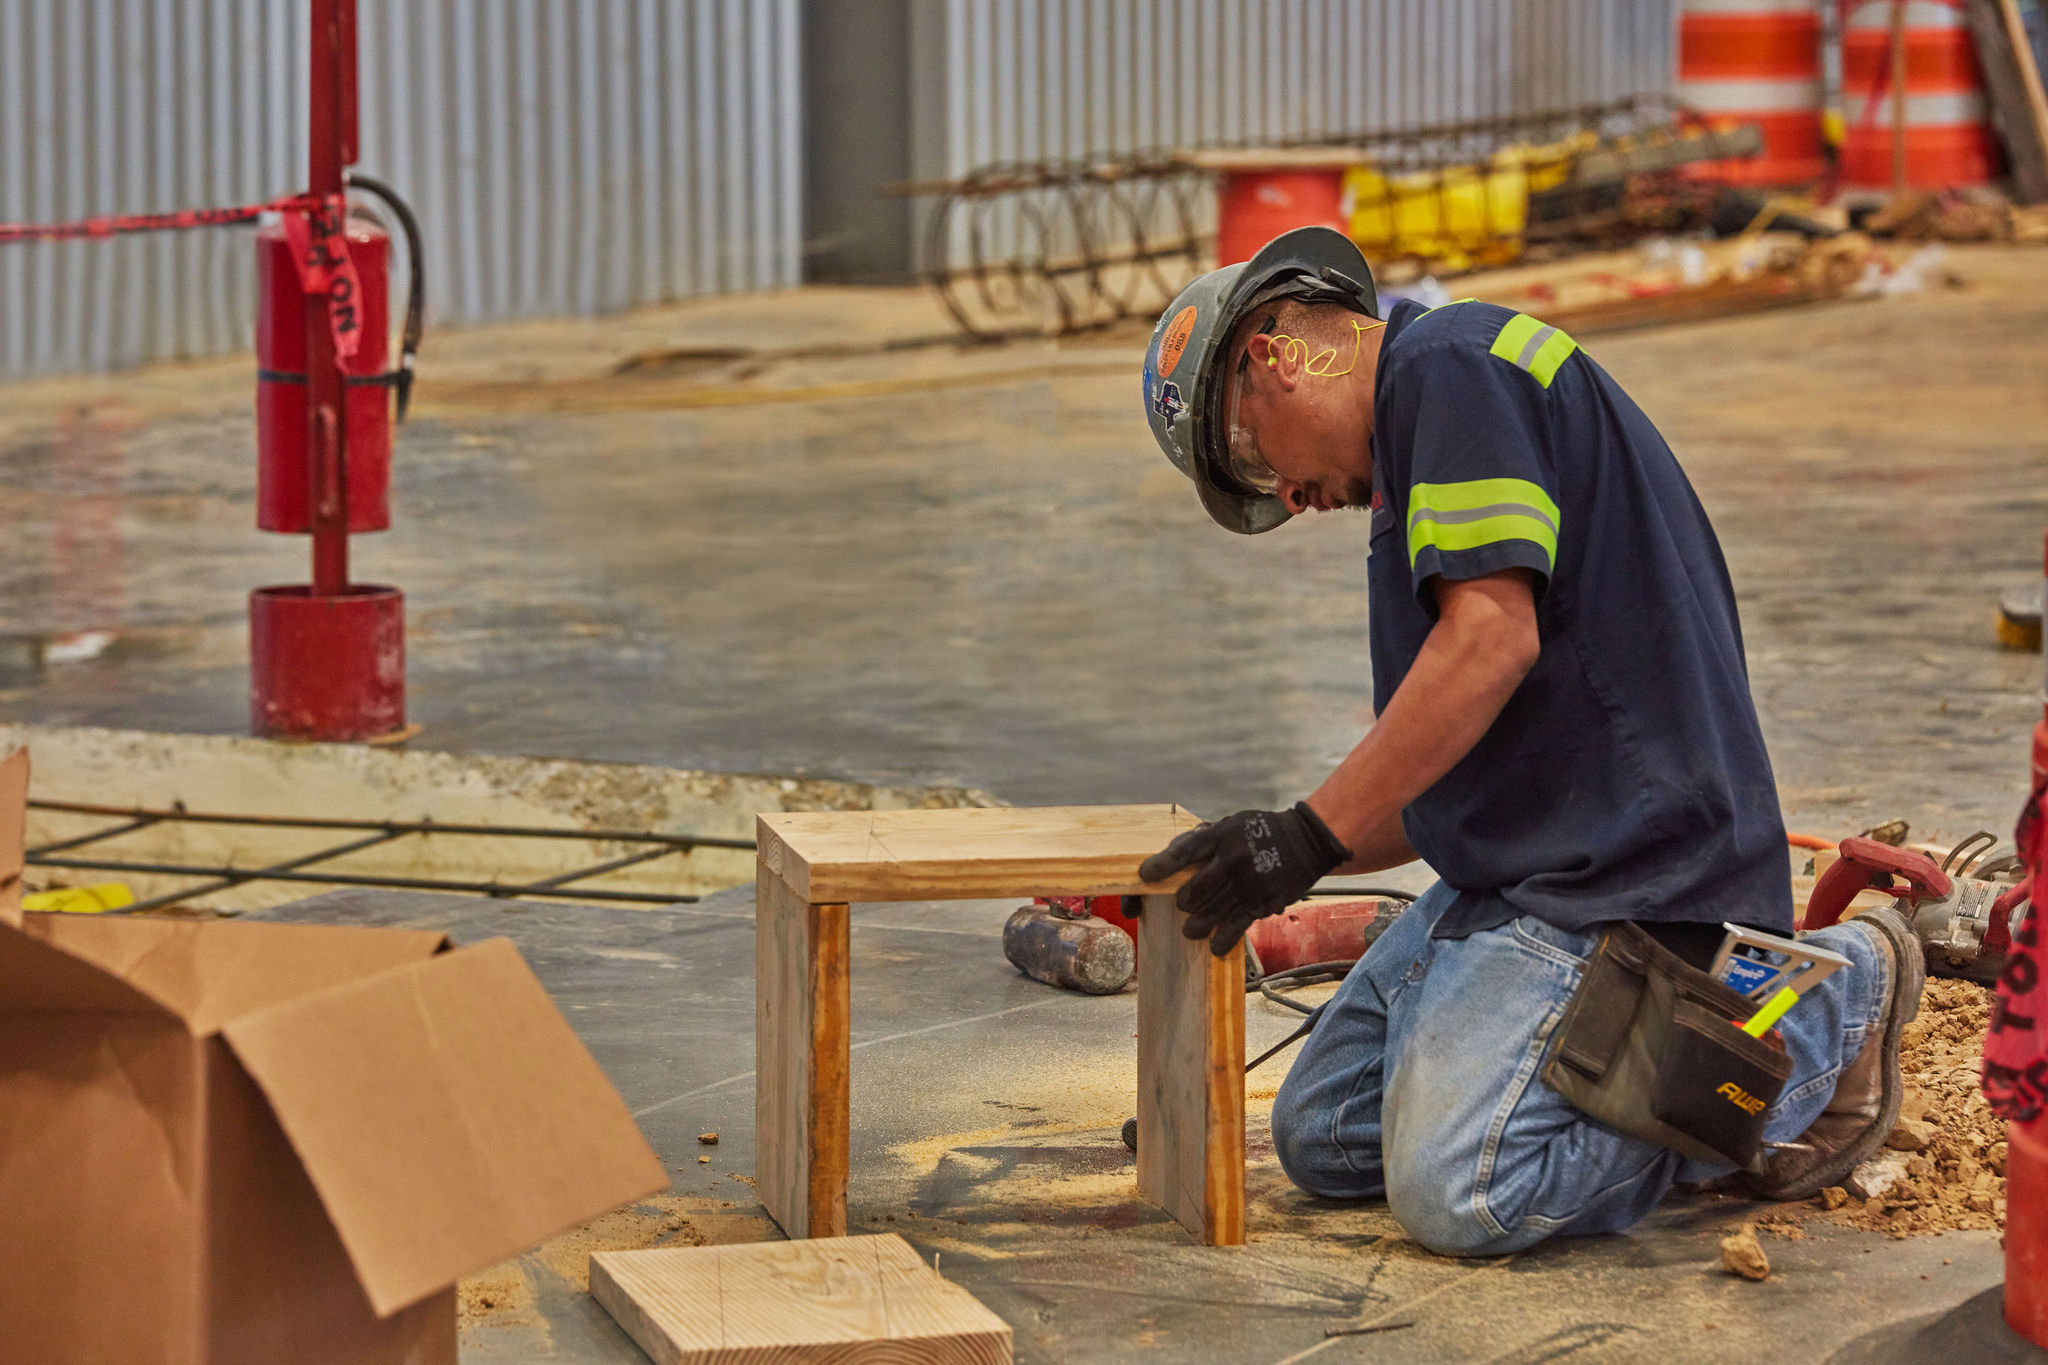 Concrete framing is a critical component of pouring concrete. After the concrete sawing and removal is completed, carpenters must build wooden forms to ensure the concrete pour goes off without issues.